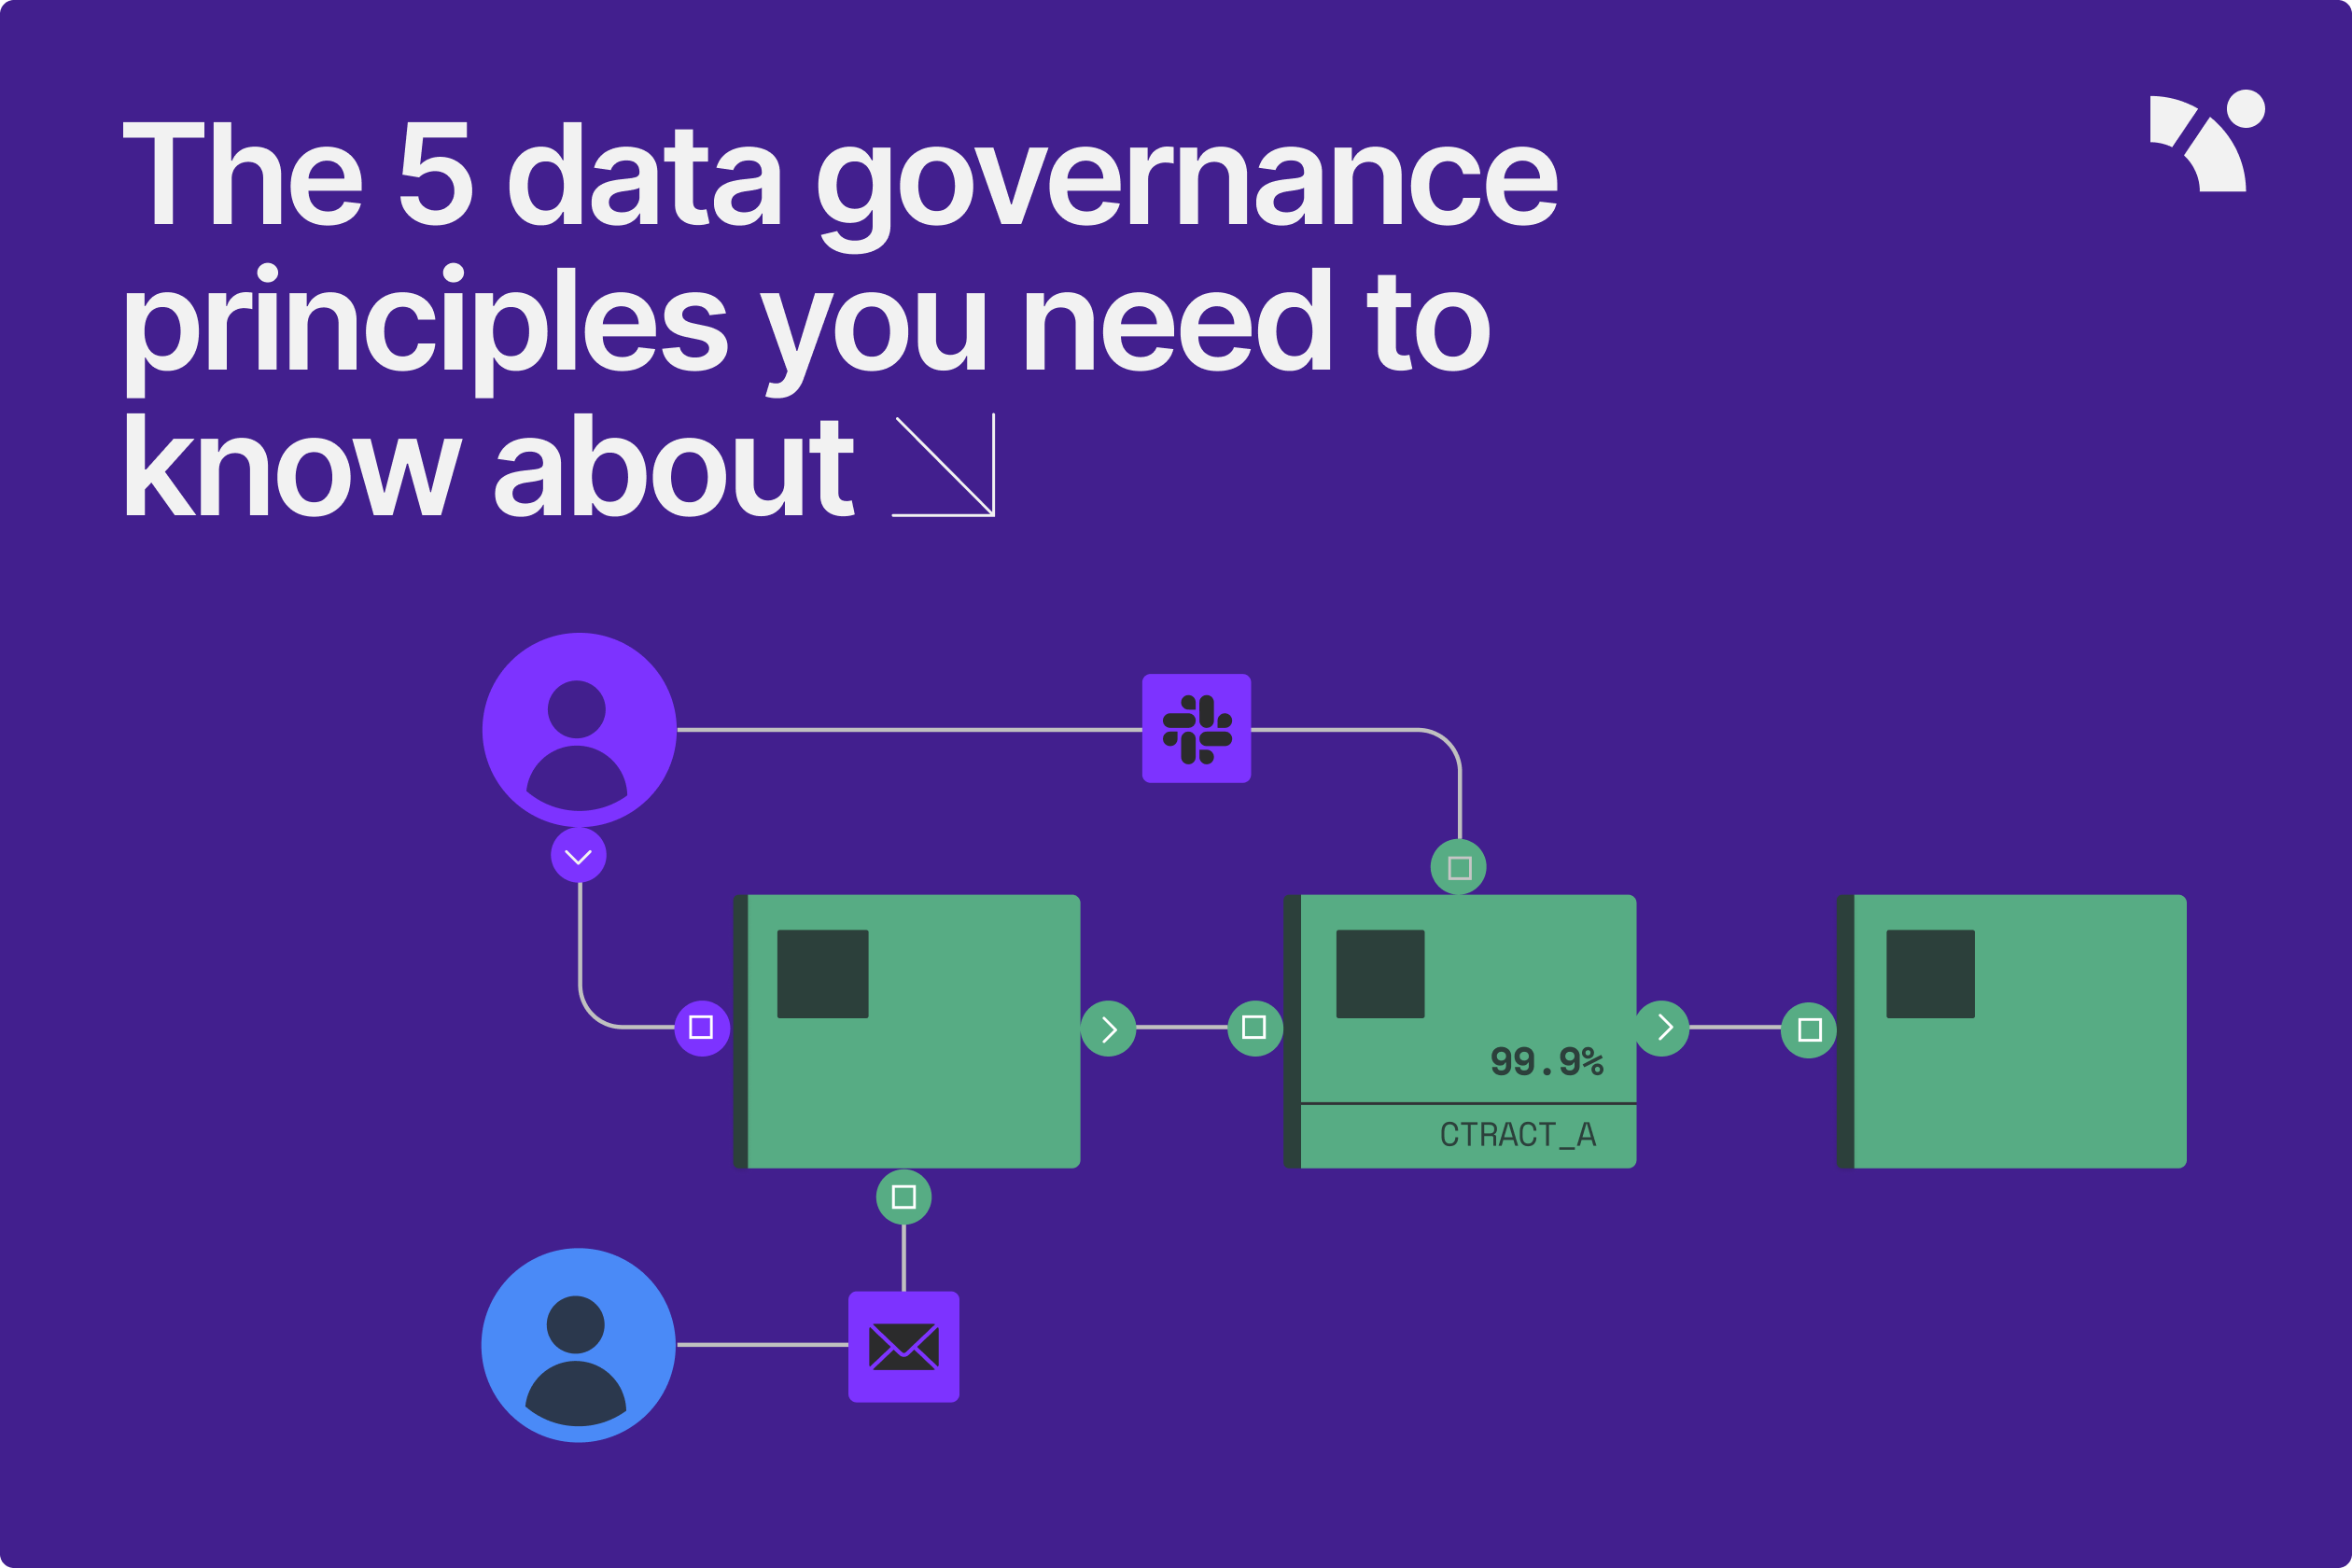 The 5 data governance principles you need to know about